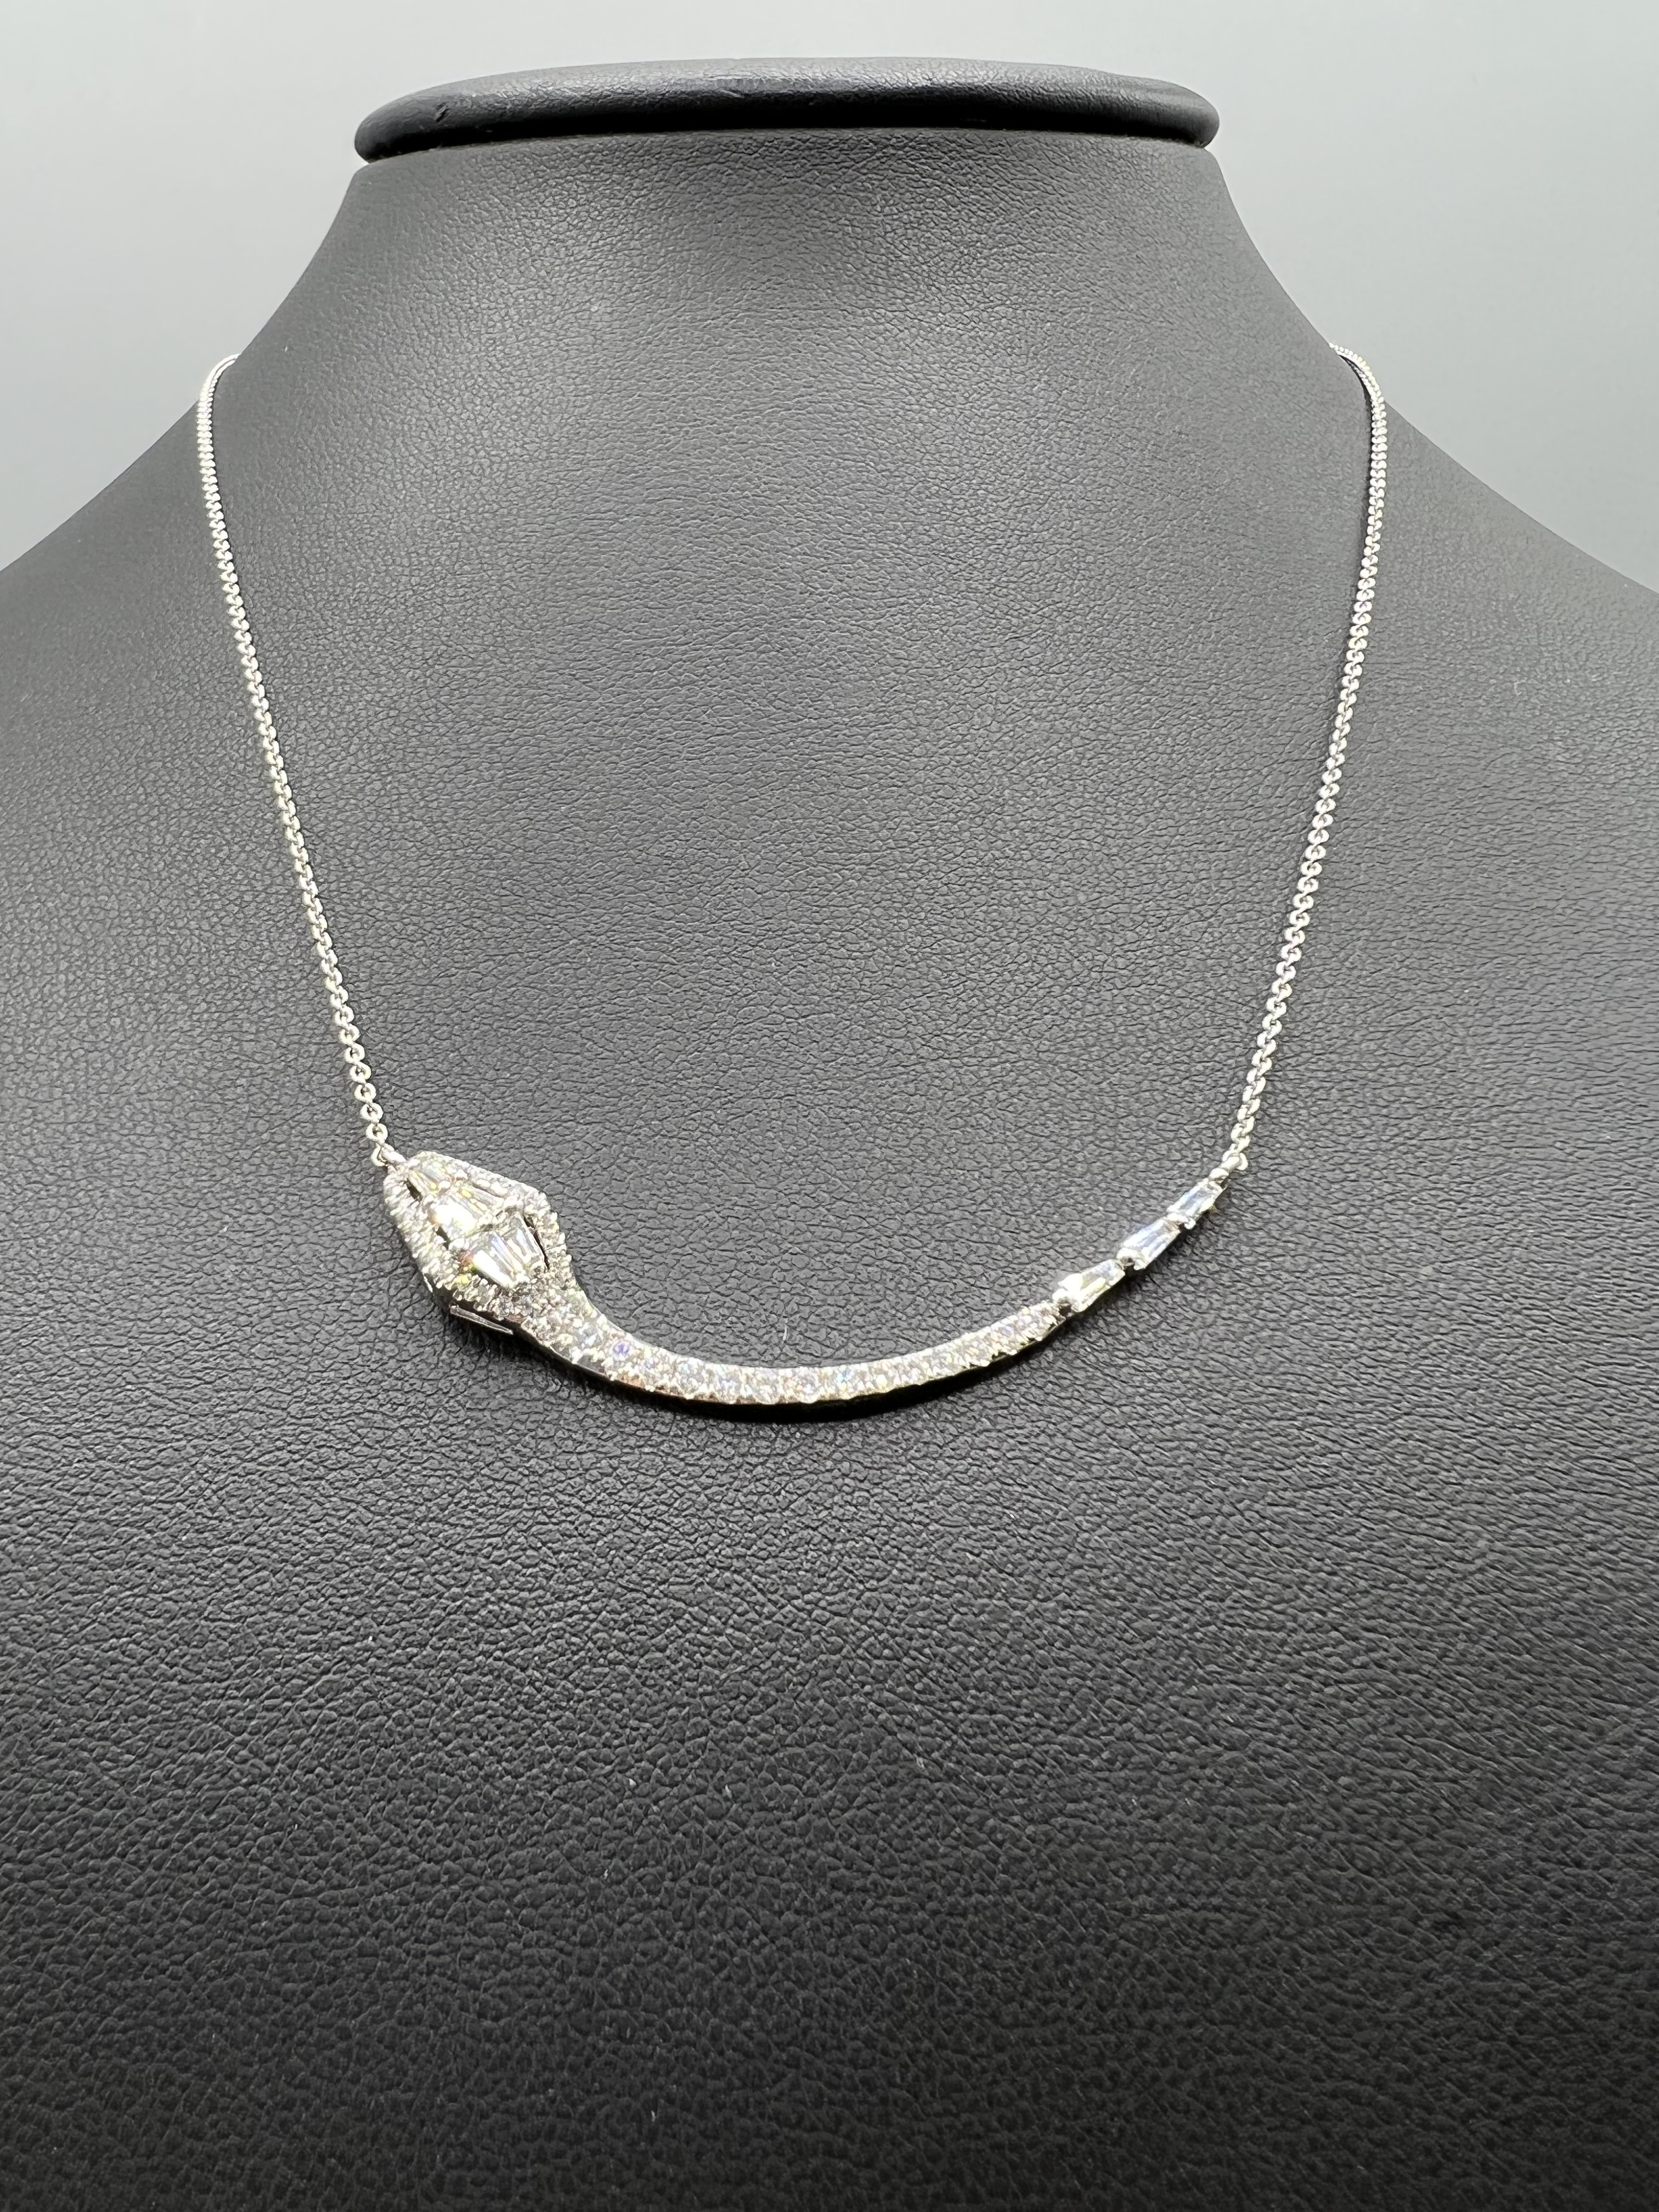 Brand New Ex-Display 18ct White Gold & Diamond Matching Snake Pattern Ring & Necklace Set (Chain - Image 3 of 3